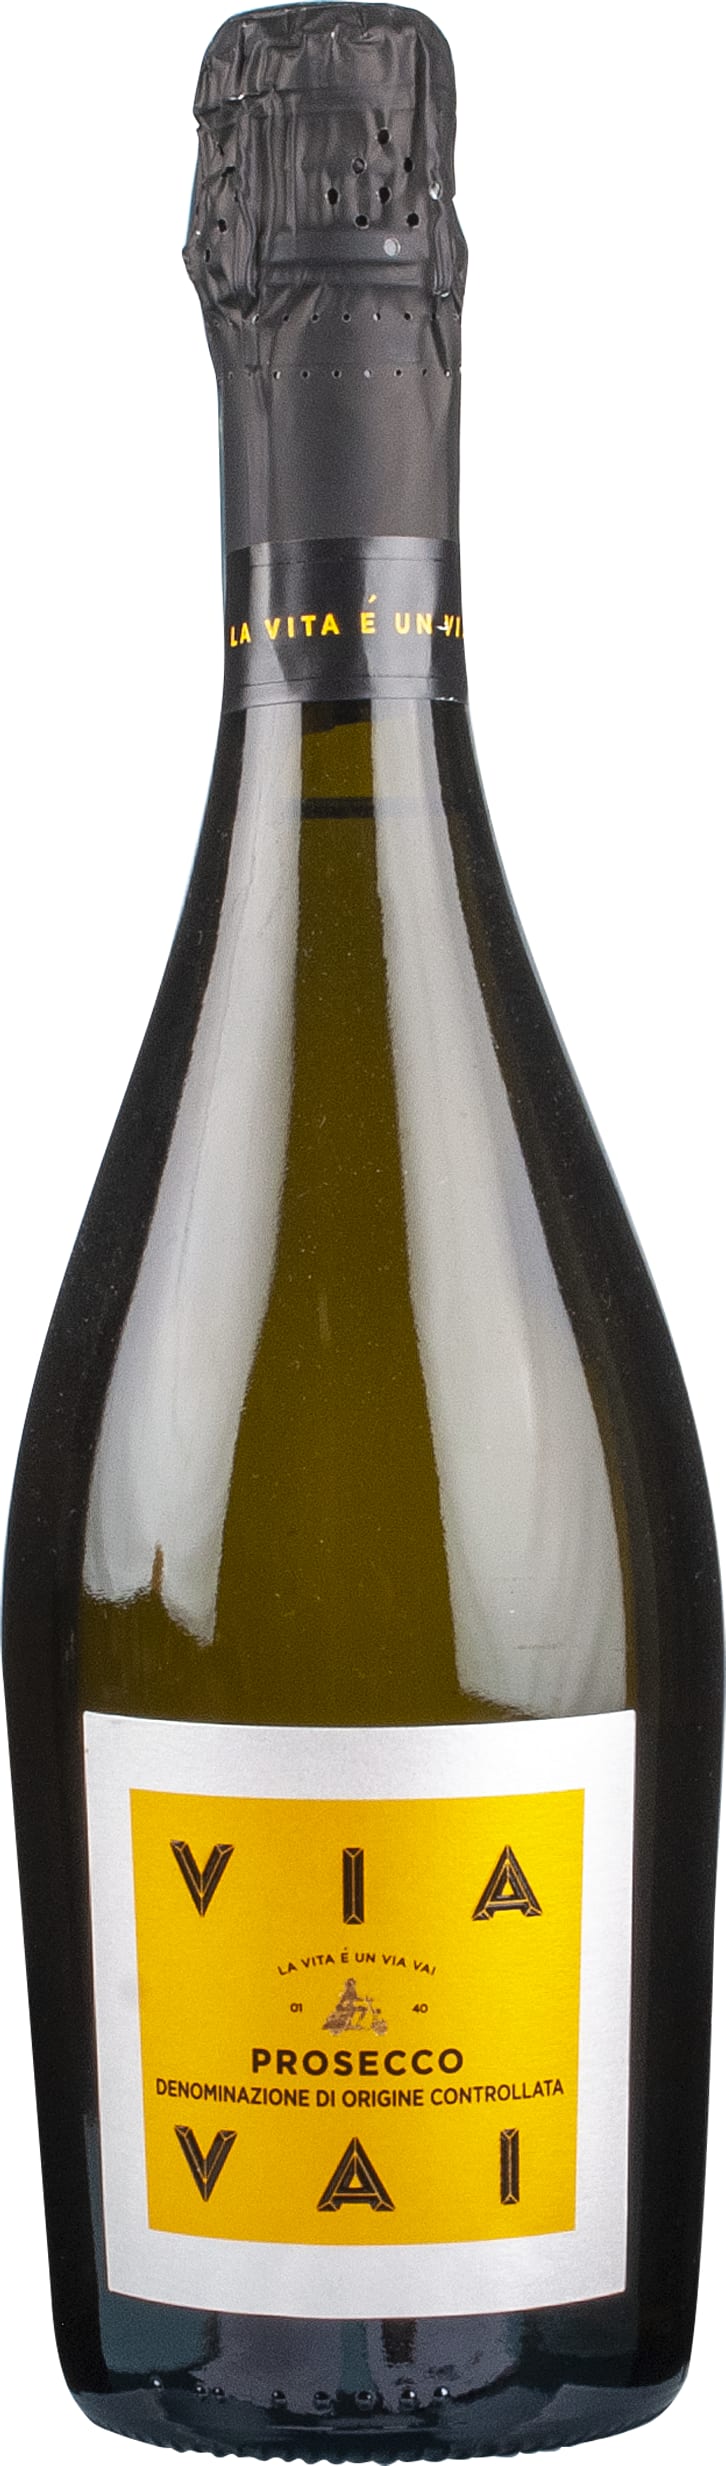 Via Vai Prosecco 20cl NV - Buy Via Vai Wines from GREAT WINES DIRECT wine shop